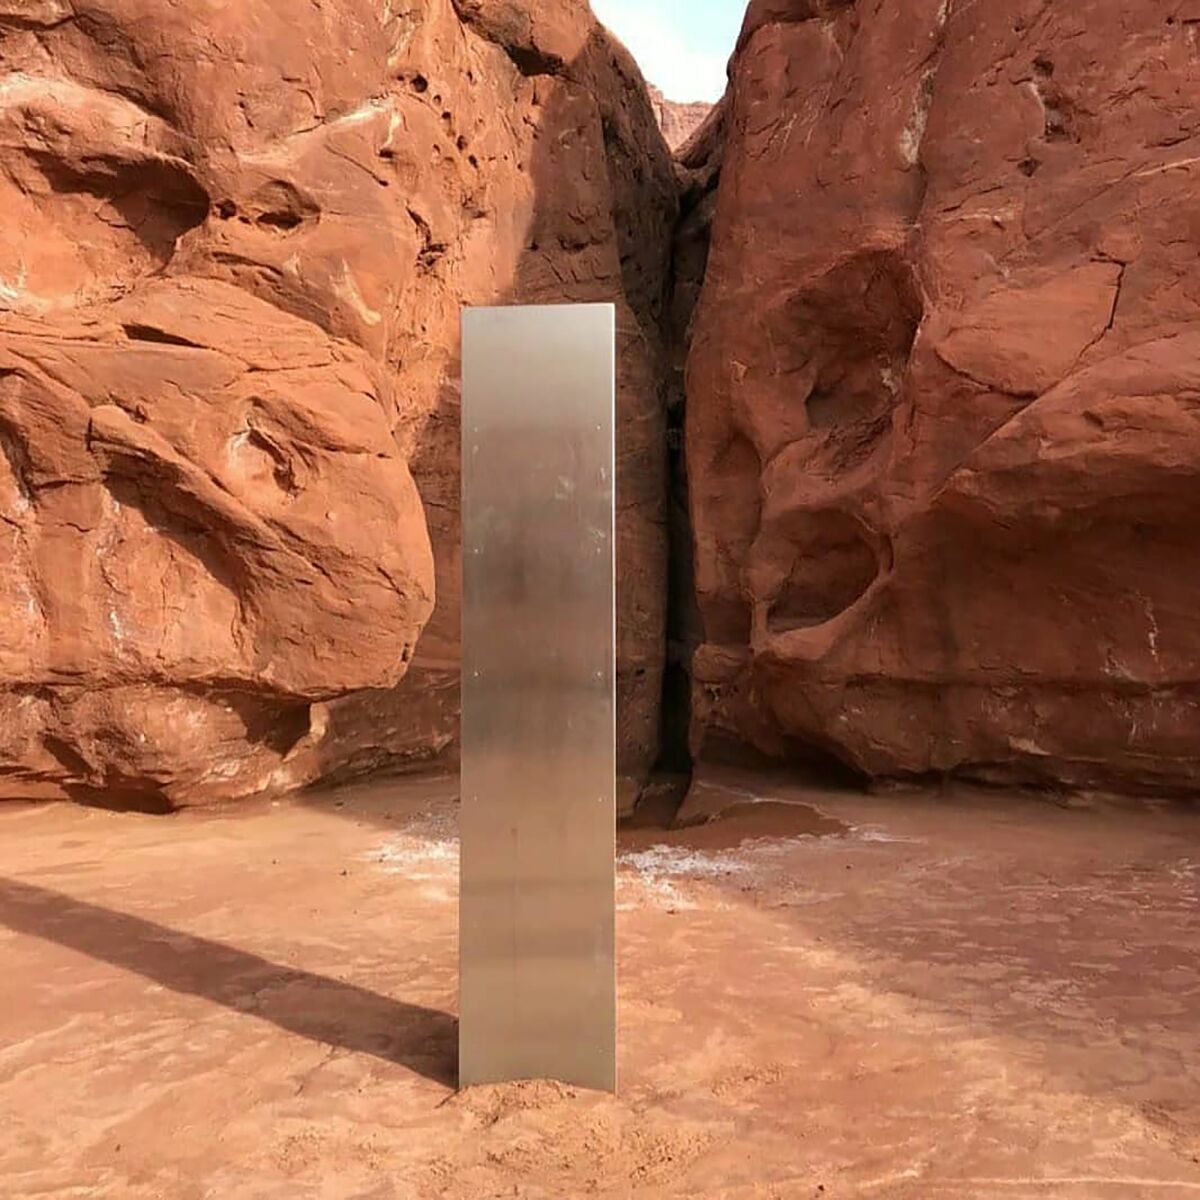 A metal monolith planted in the ground in a remote area of red rock in Utah.